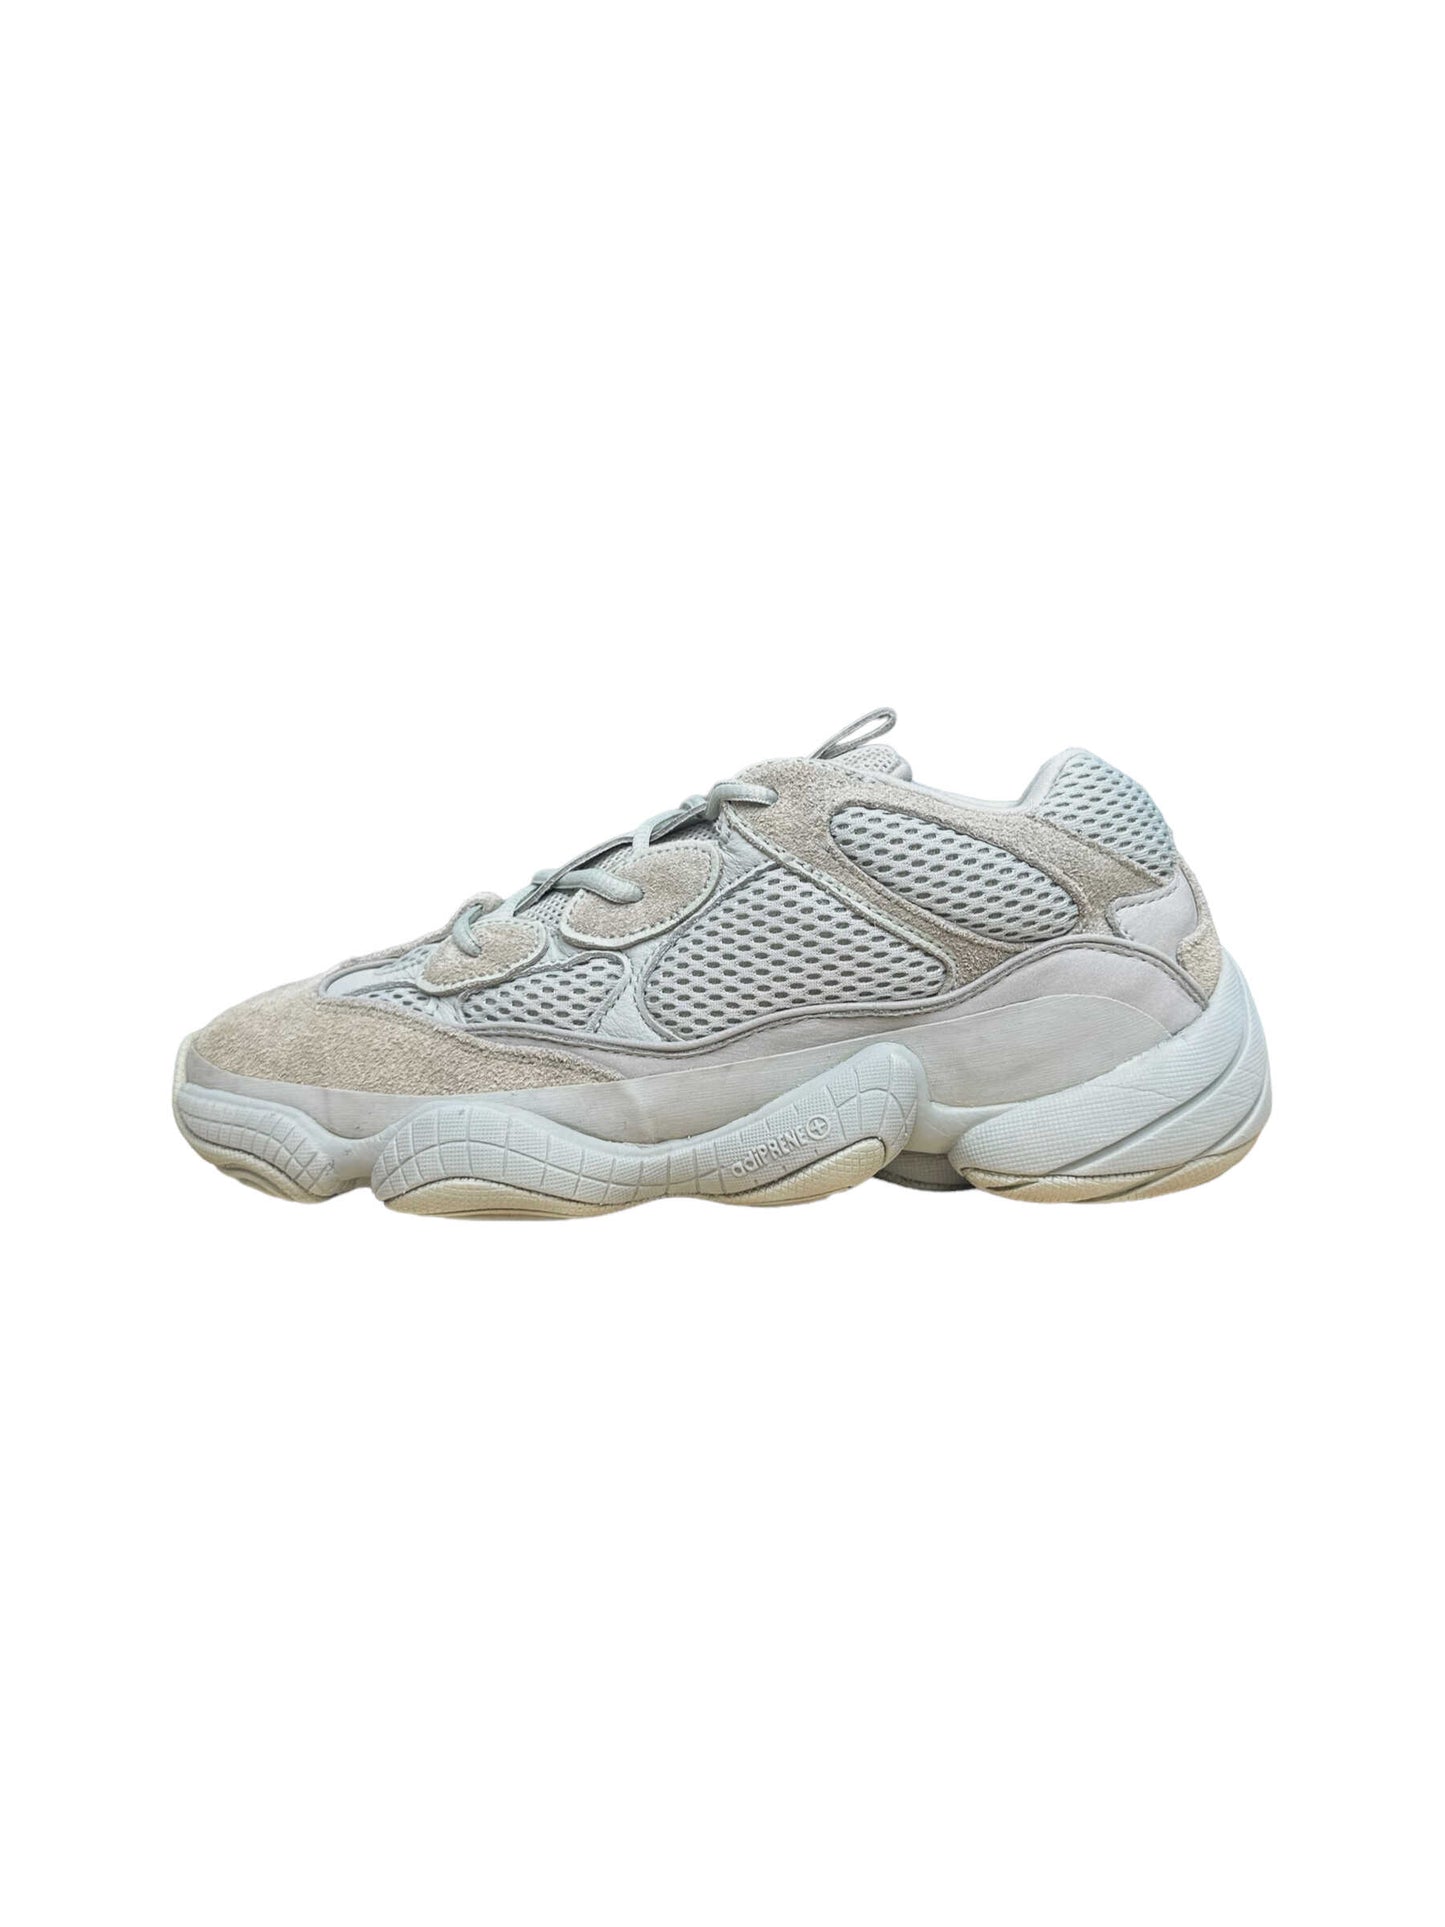 Adidas Yeezy 500 Blush Sneakers — Genuine Design luxury consignment Calgary, Alberta, New & pre-owned clothing, shoes, accessories.